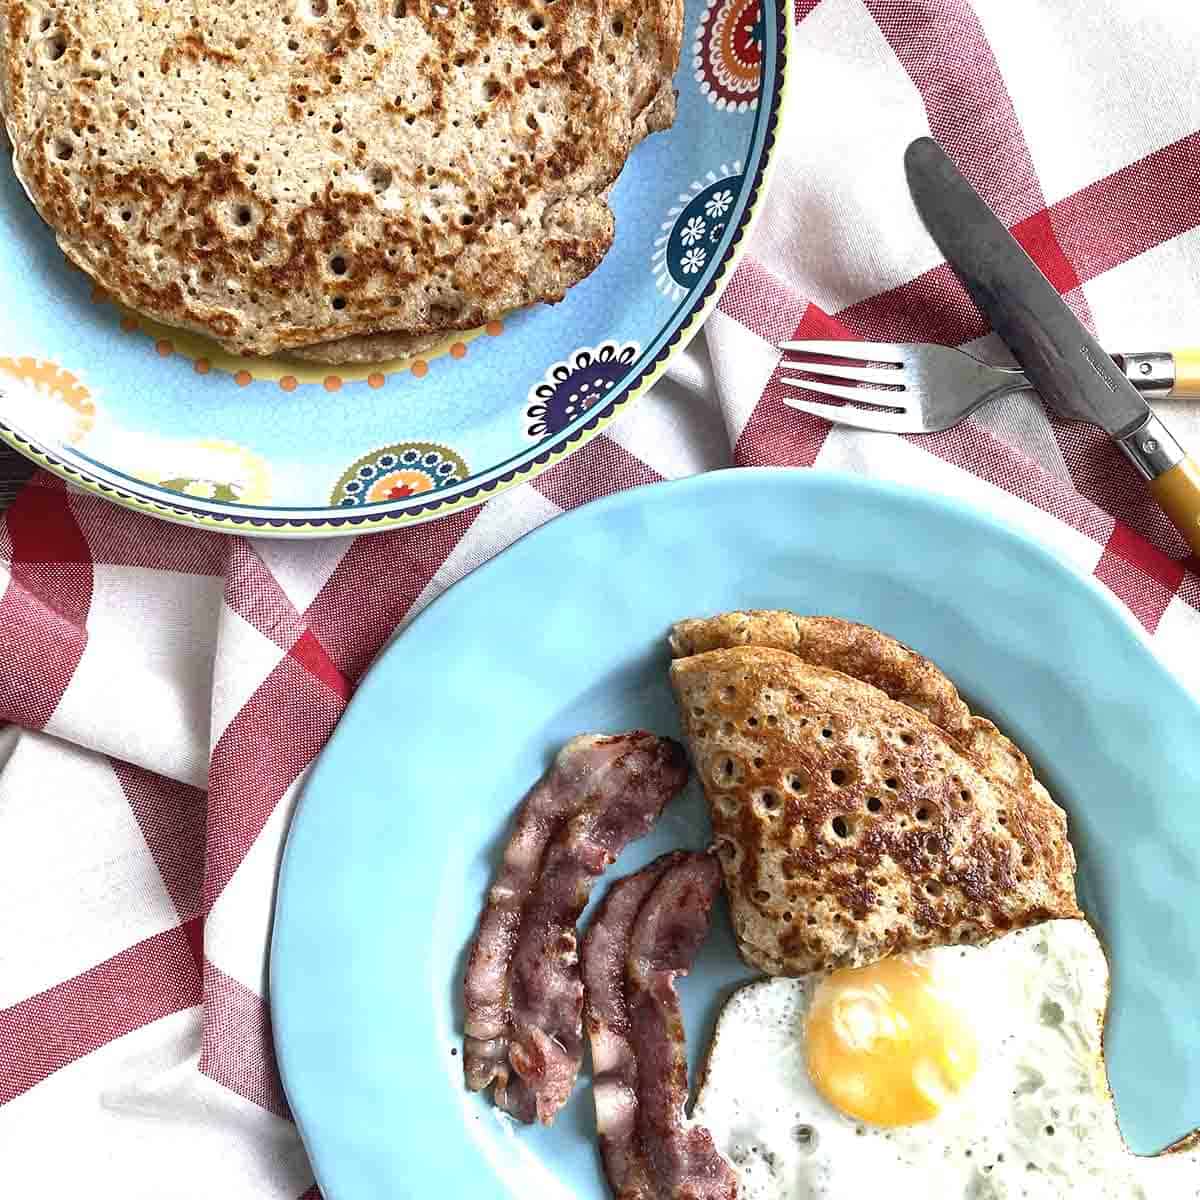 Derbyshire oatcake on a plate with egg and bacon.